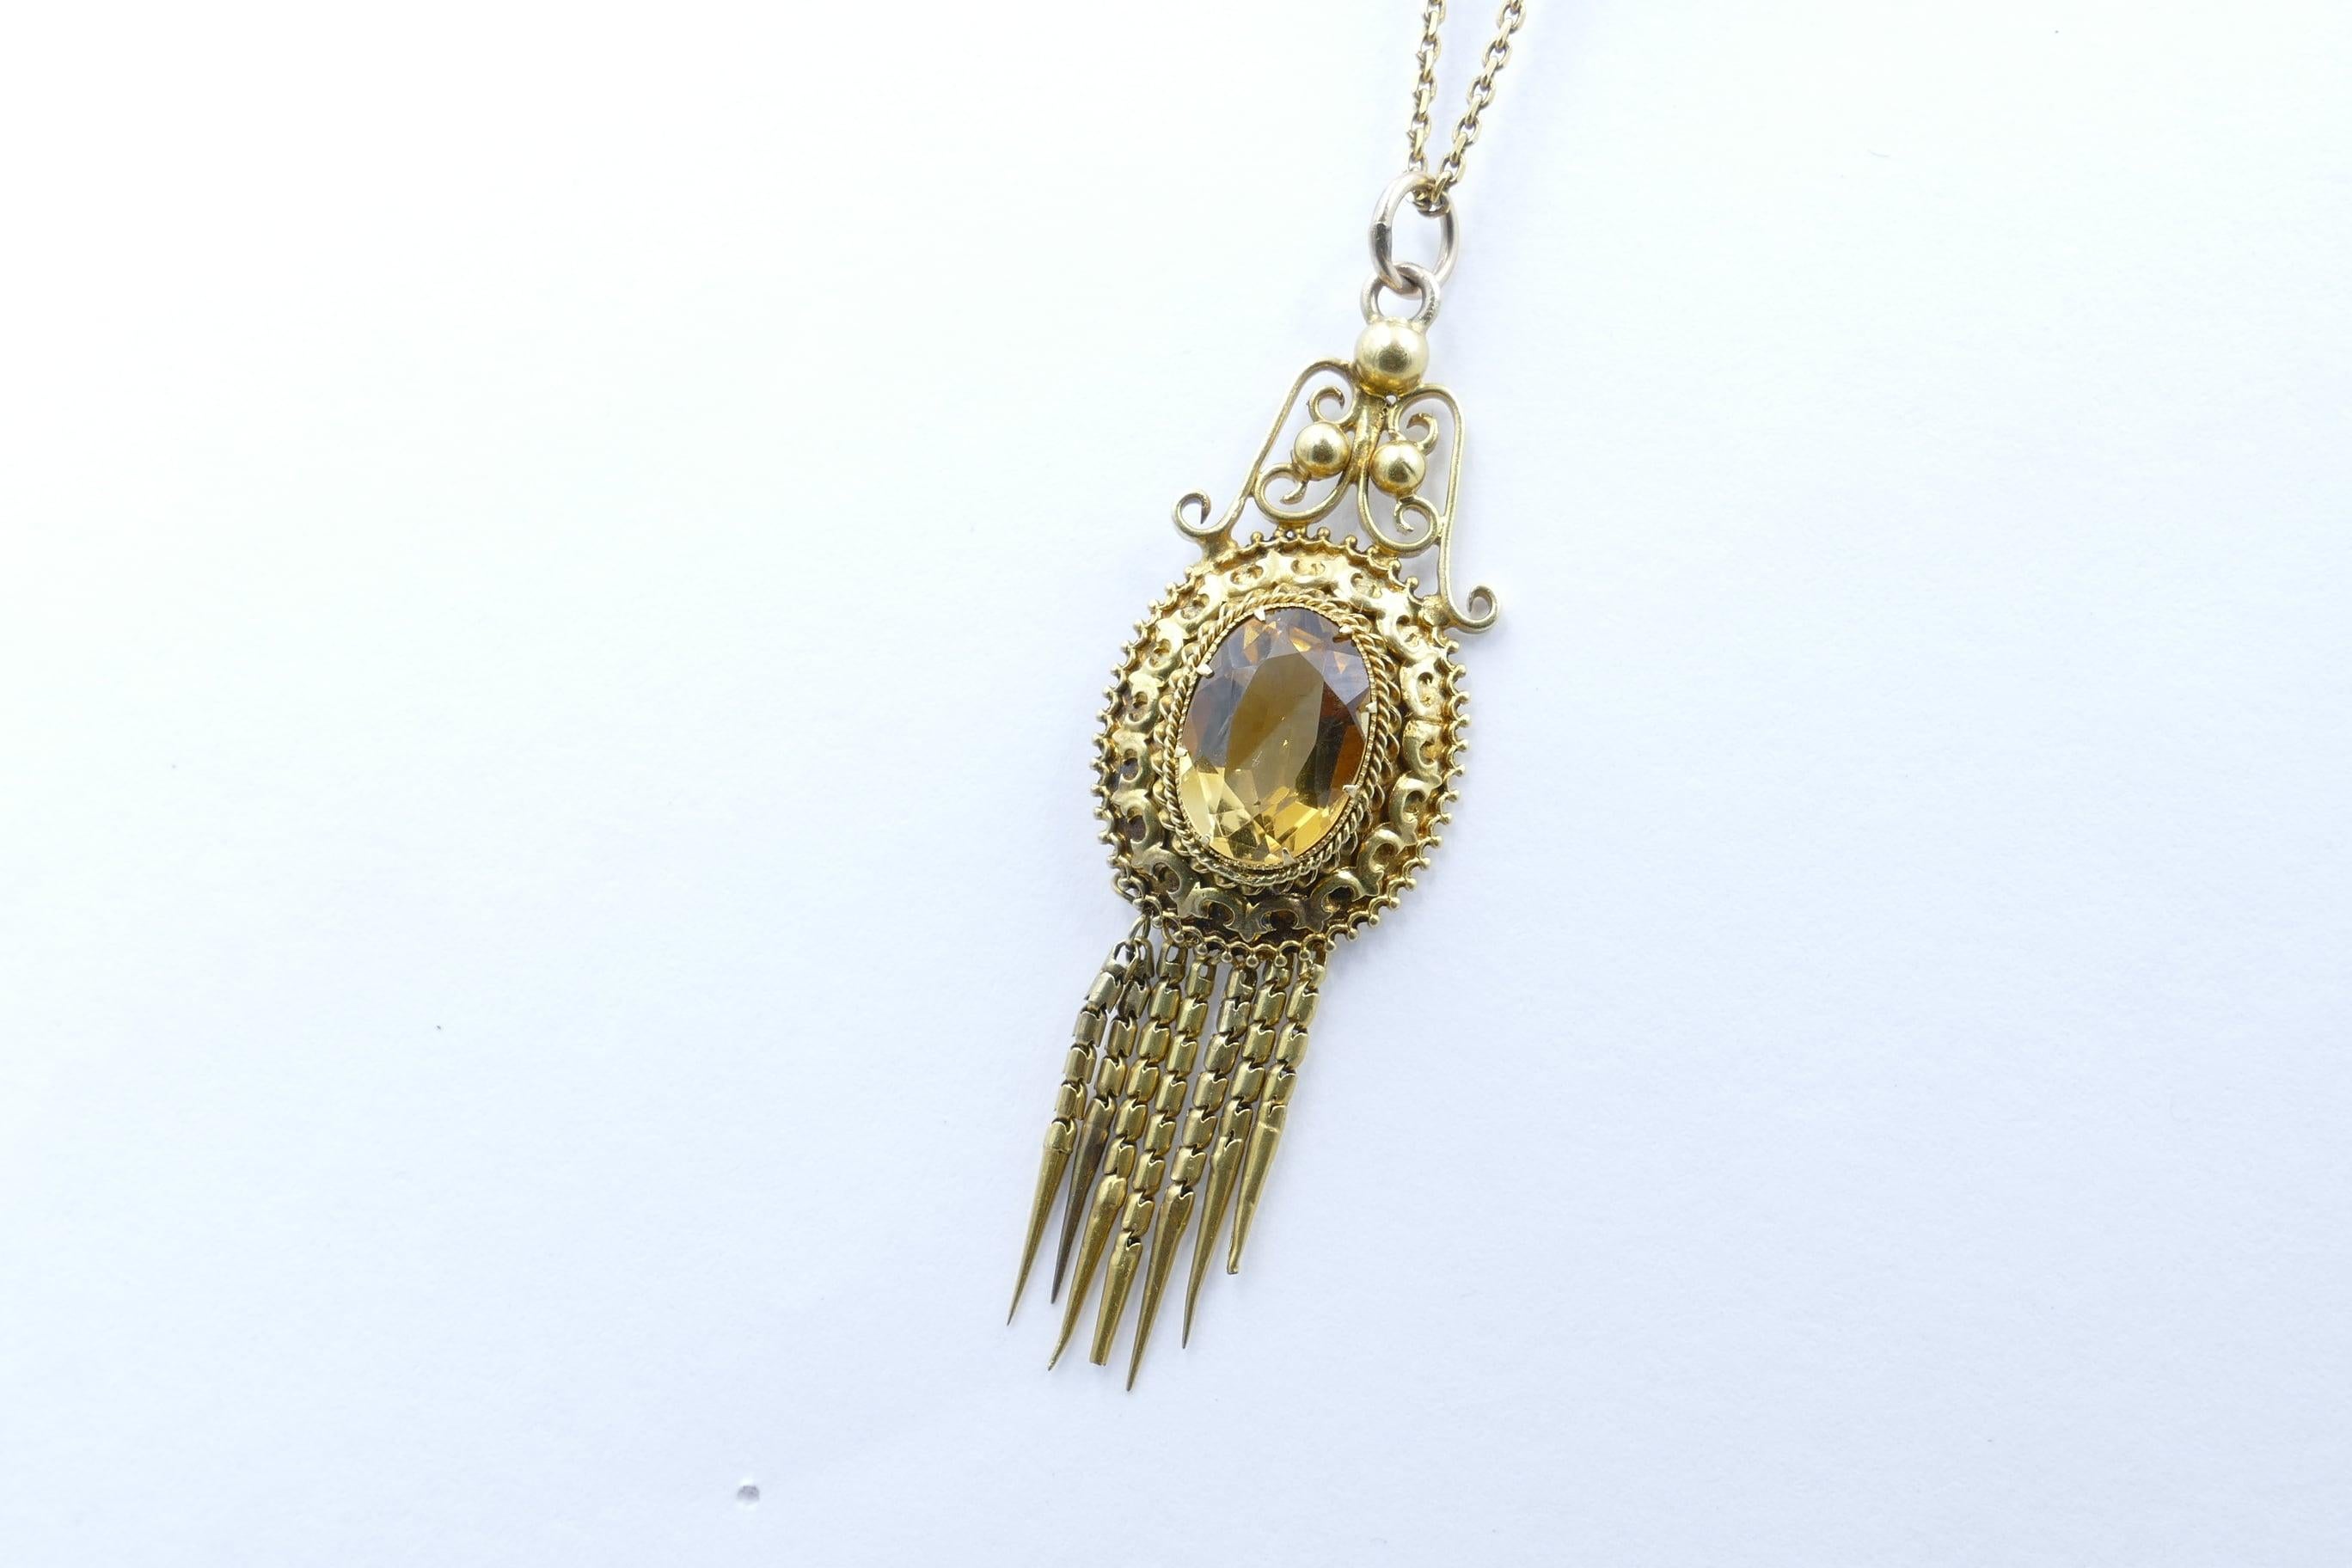 This gorgeous late 1880's Pendant is just beautiful.
The centrepiece feature is a 4.47 carat, very eye-clean, oval cut  deep yellow Citrine.
The Pendant from the Etruscan Revival period has scrolling motifs and bladed tassels.
It is in very very